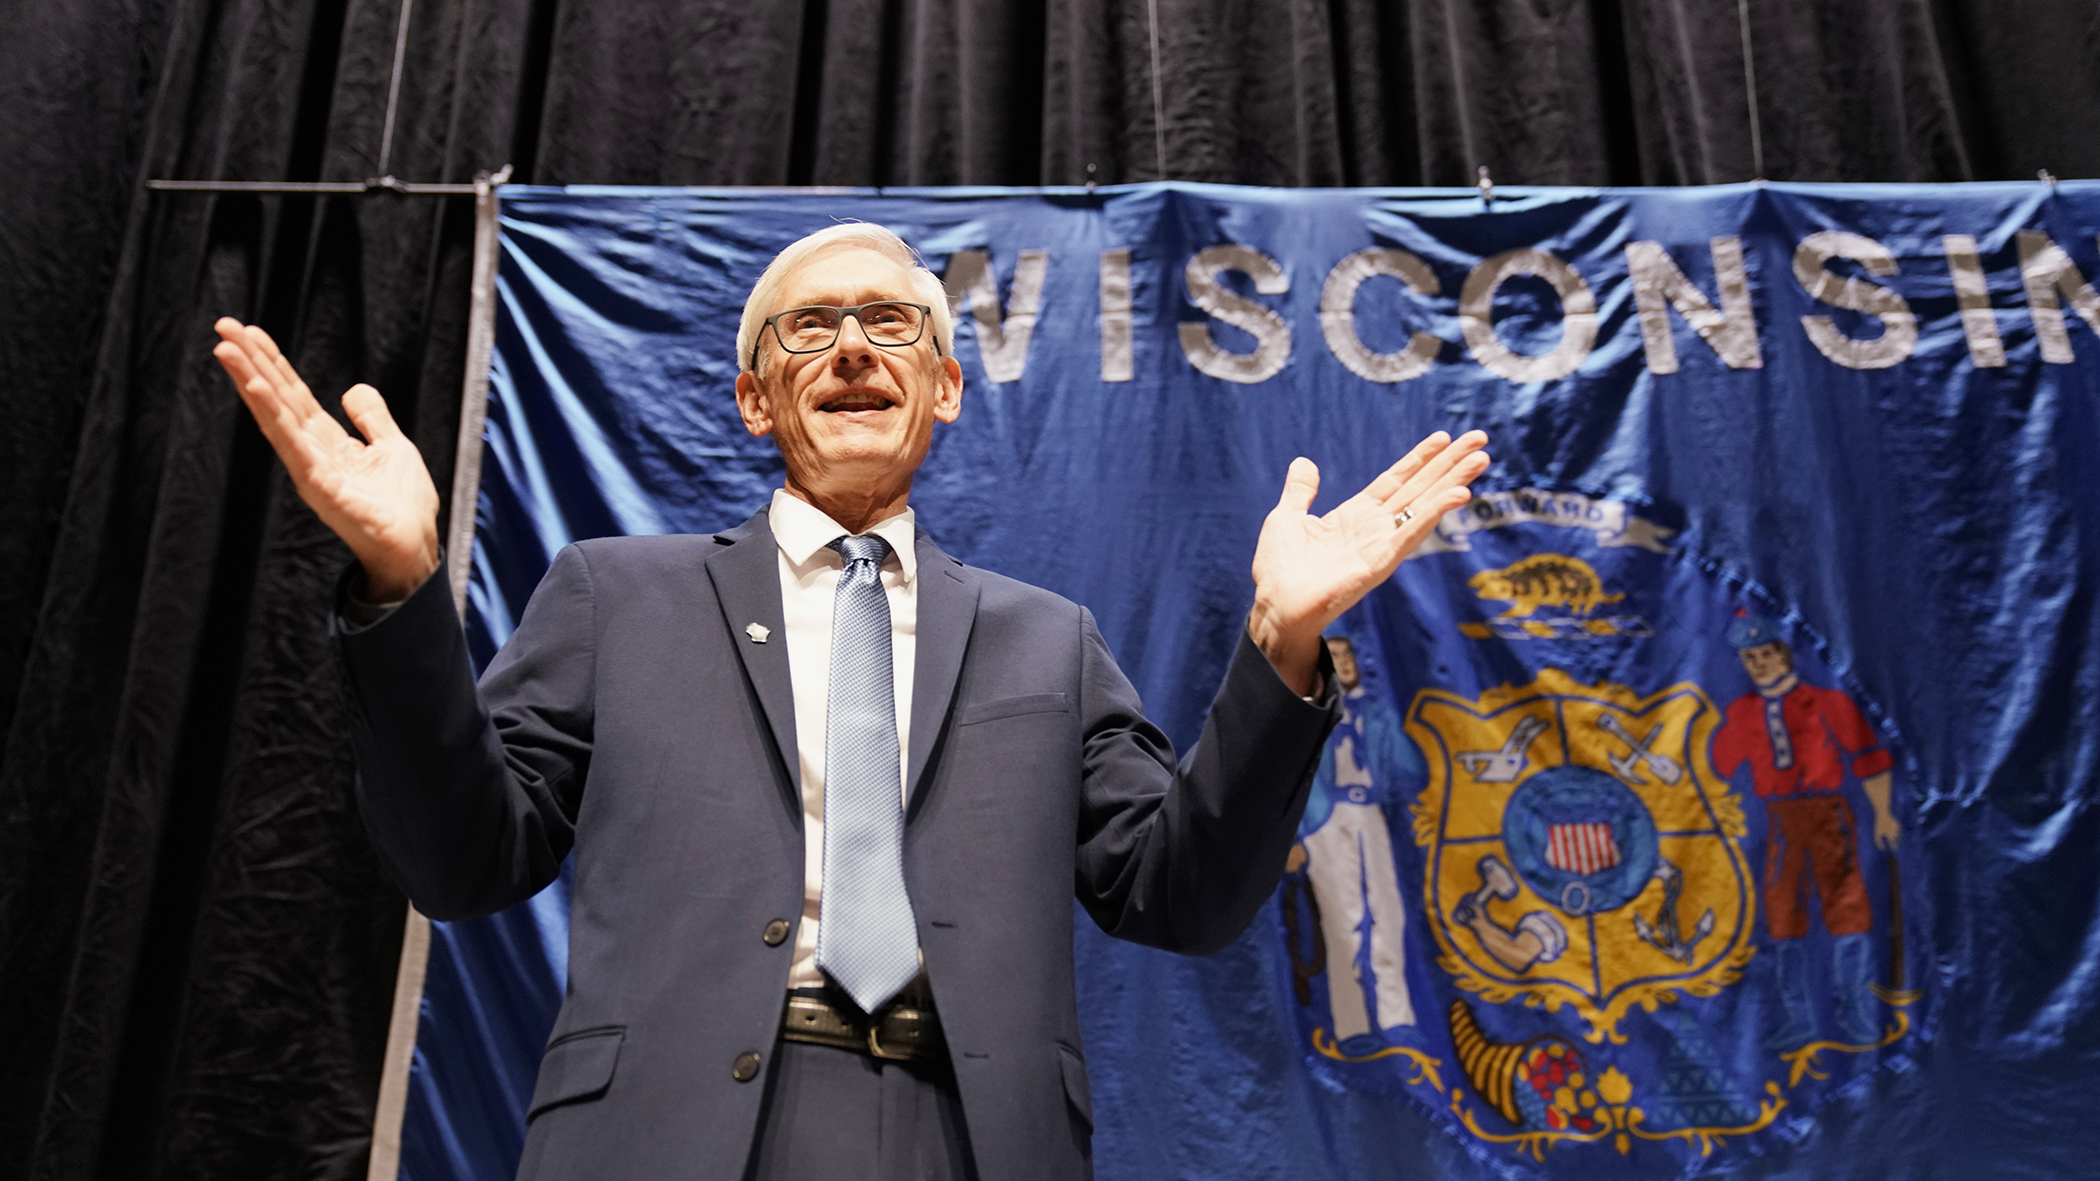 Democratic candidate for governor Tony Evers